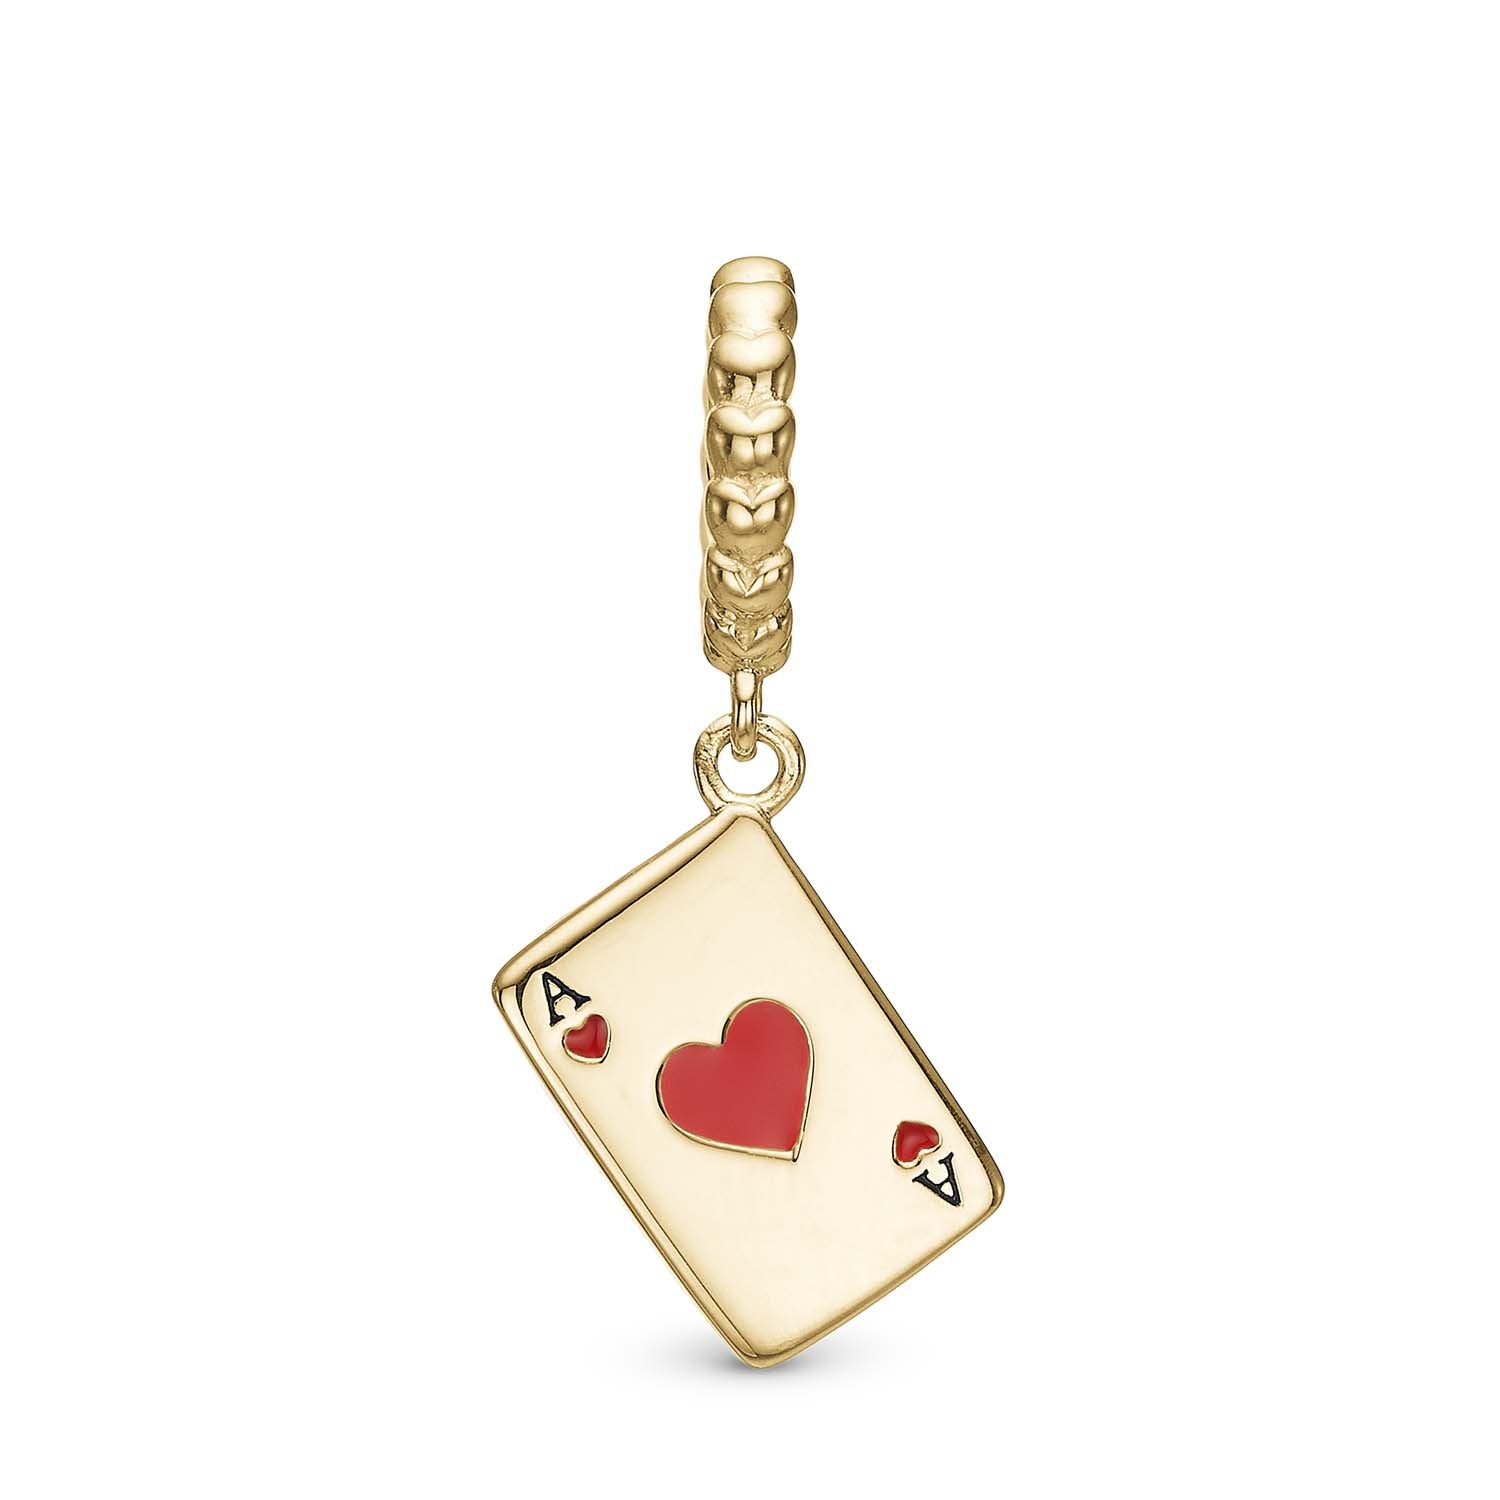 Billede af Christina Design London Jewelry & Watches - Ace of Hearts charm forgyldt 6 mm.